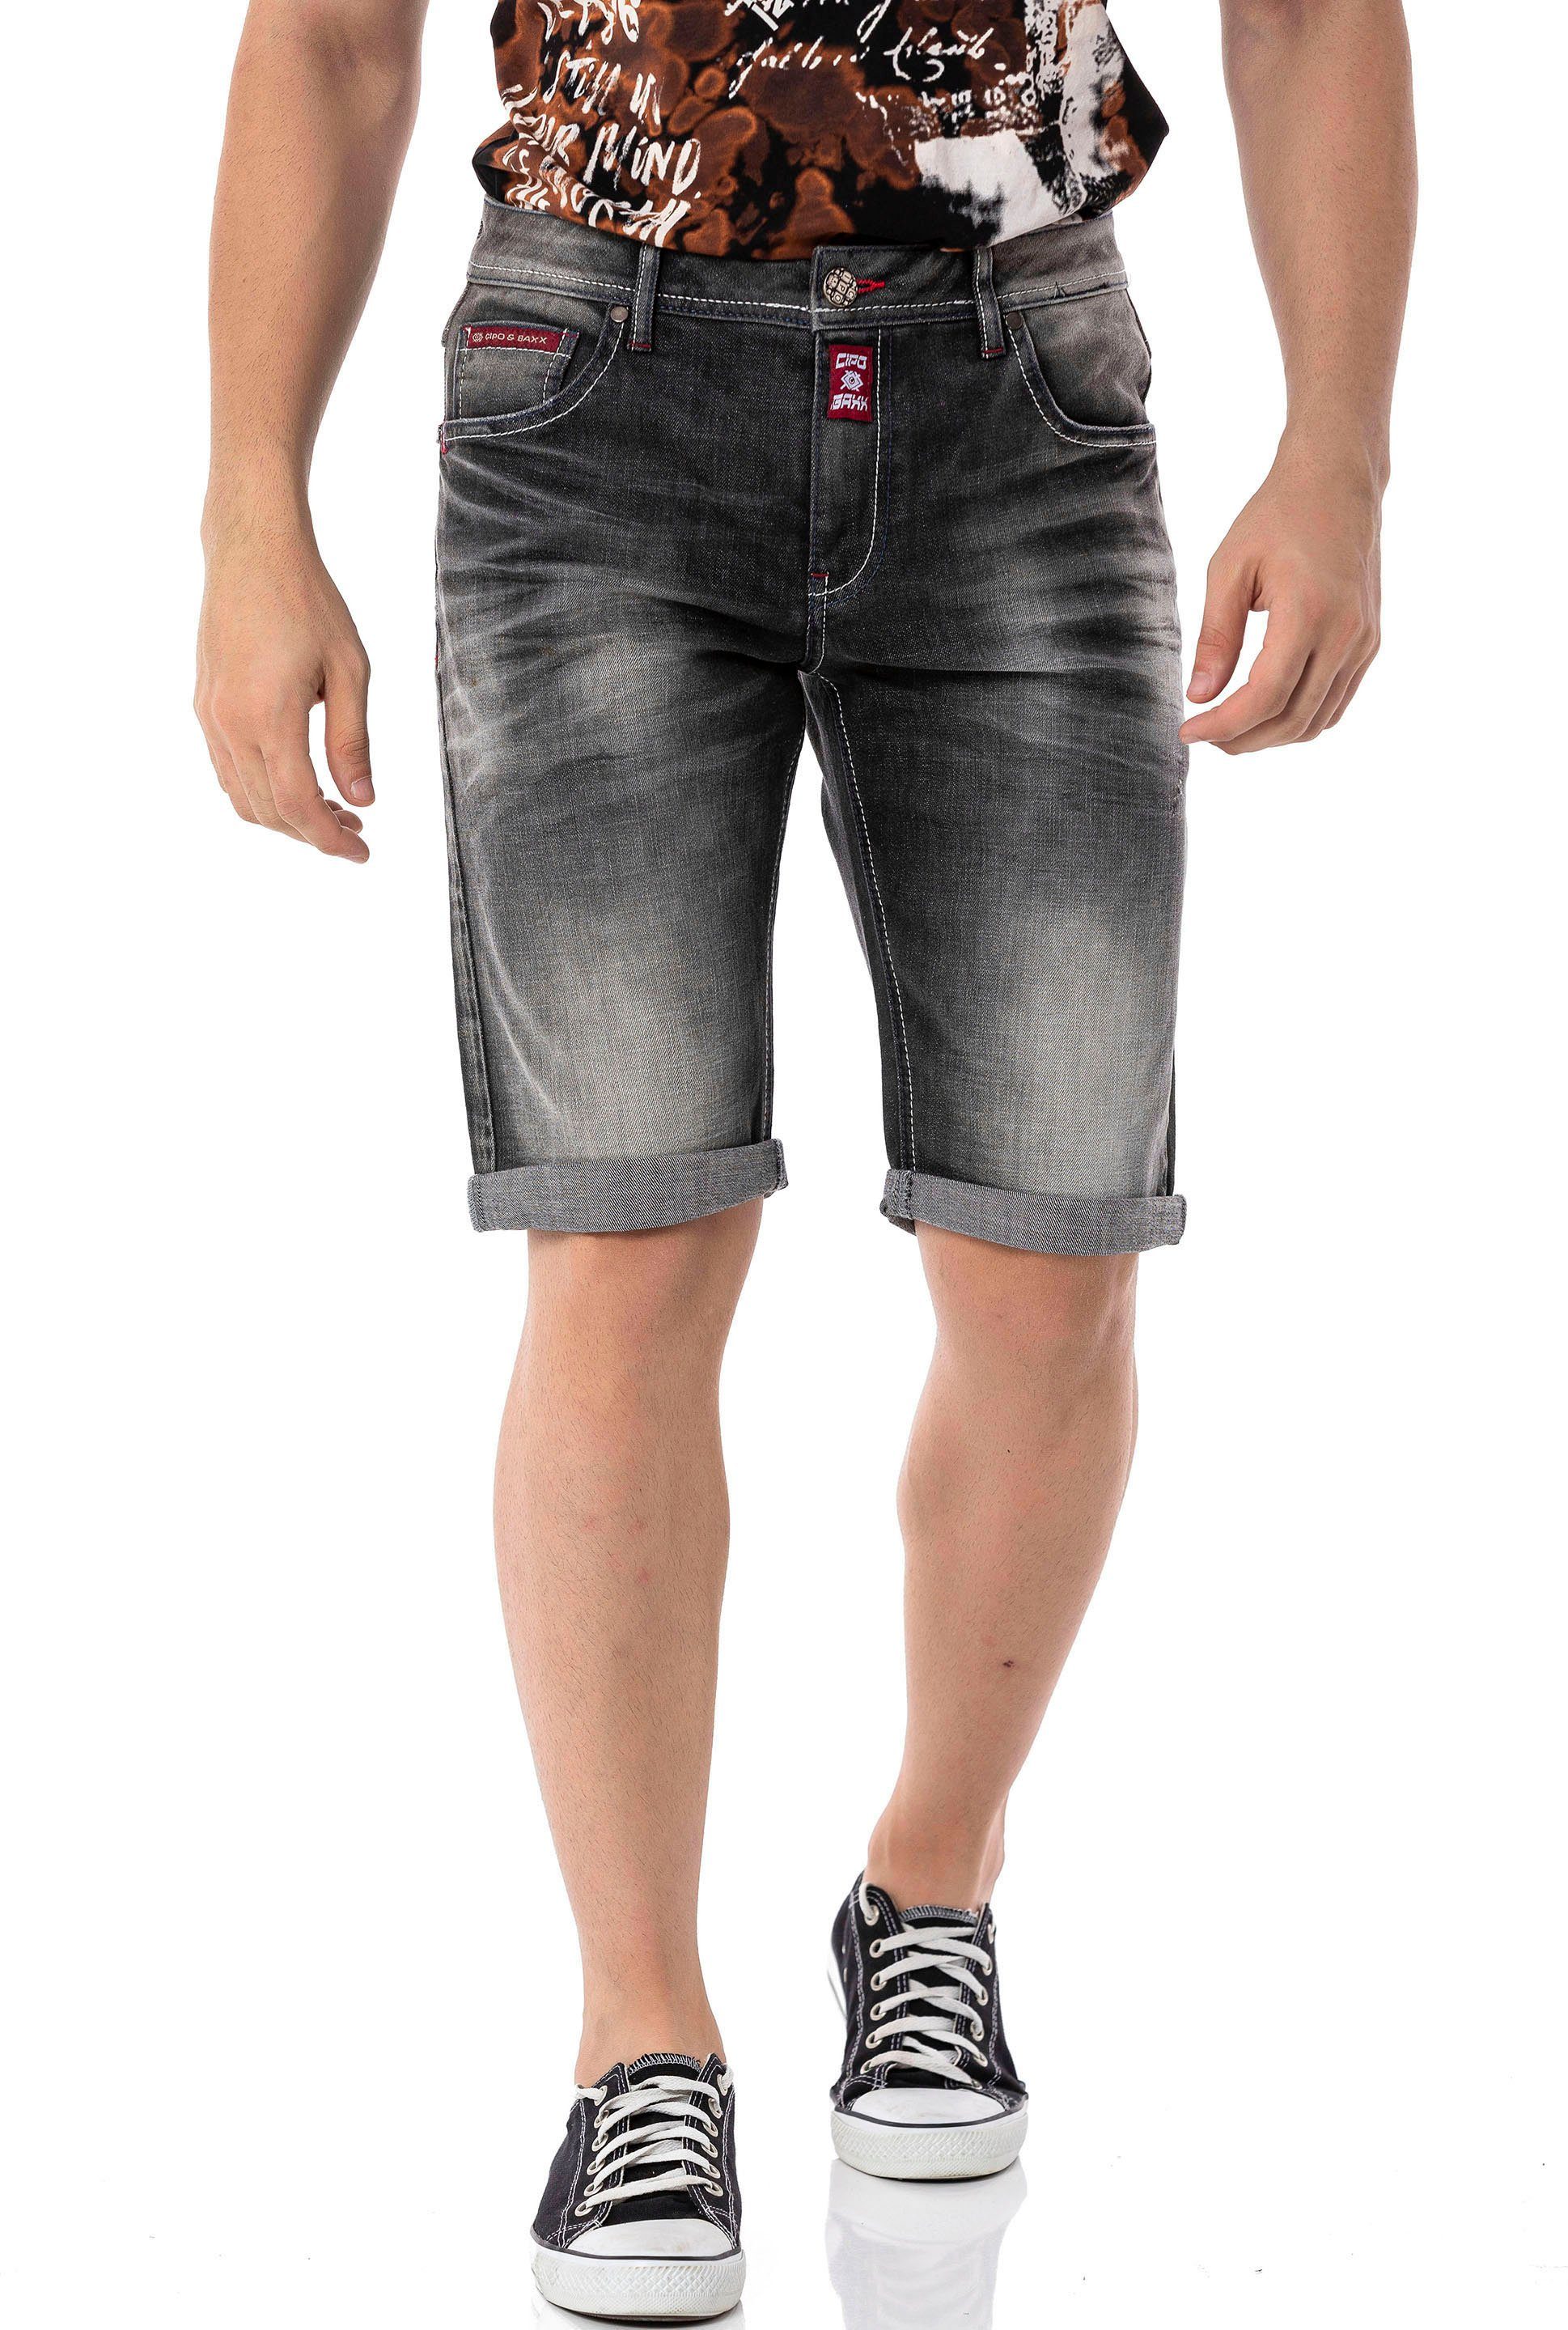 Cipo & Baxx Jeansshorts black used | Jeansshorts